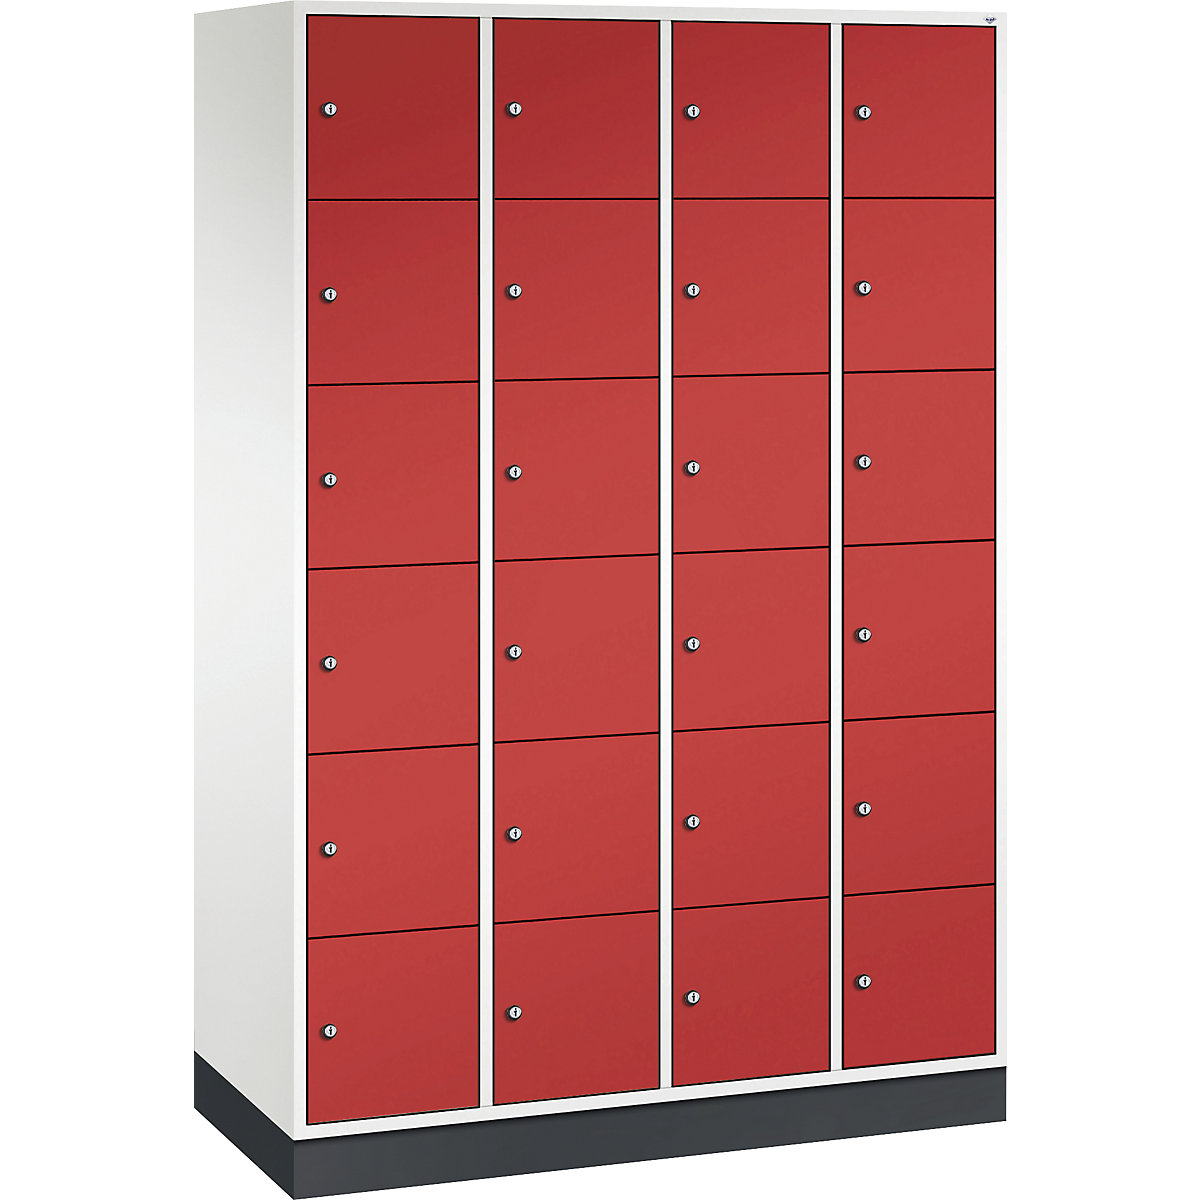 INTRO steel compartment locker, compartment height 285 mm – C+P, WxD 1220 x 500 mm, 24 compartments, pure white body, flame red doors-3